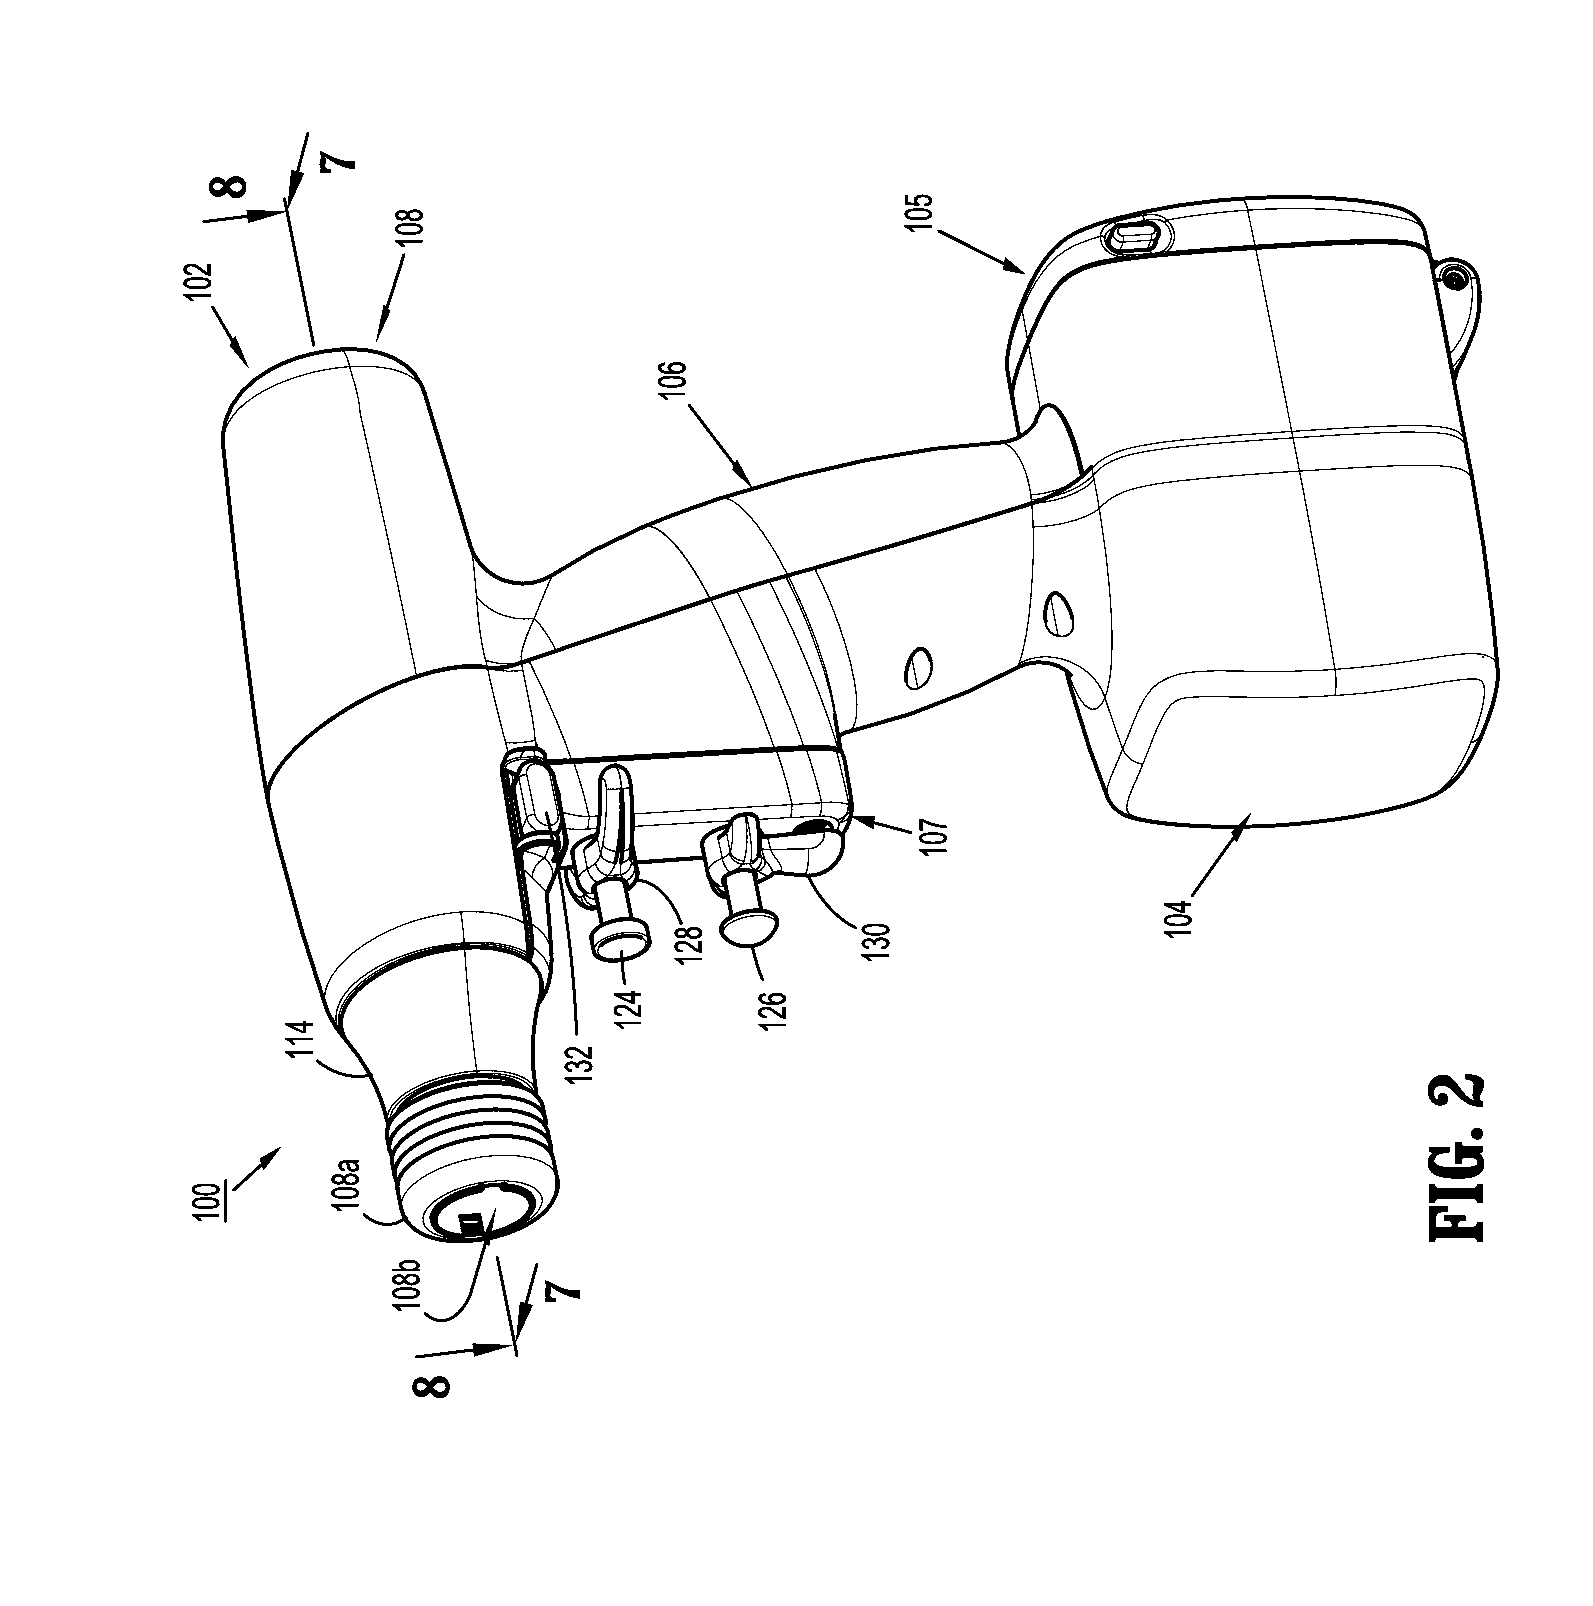 Hand held surgical handle assembly, surgical adapters for use between surgical handle assembly and surgical end effectors, and methods of use